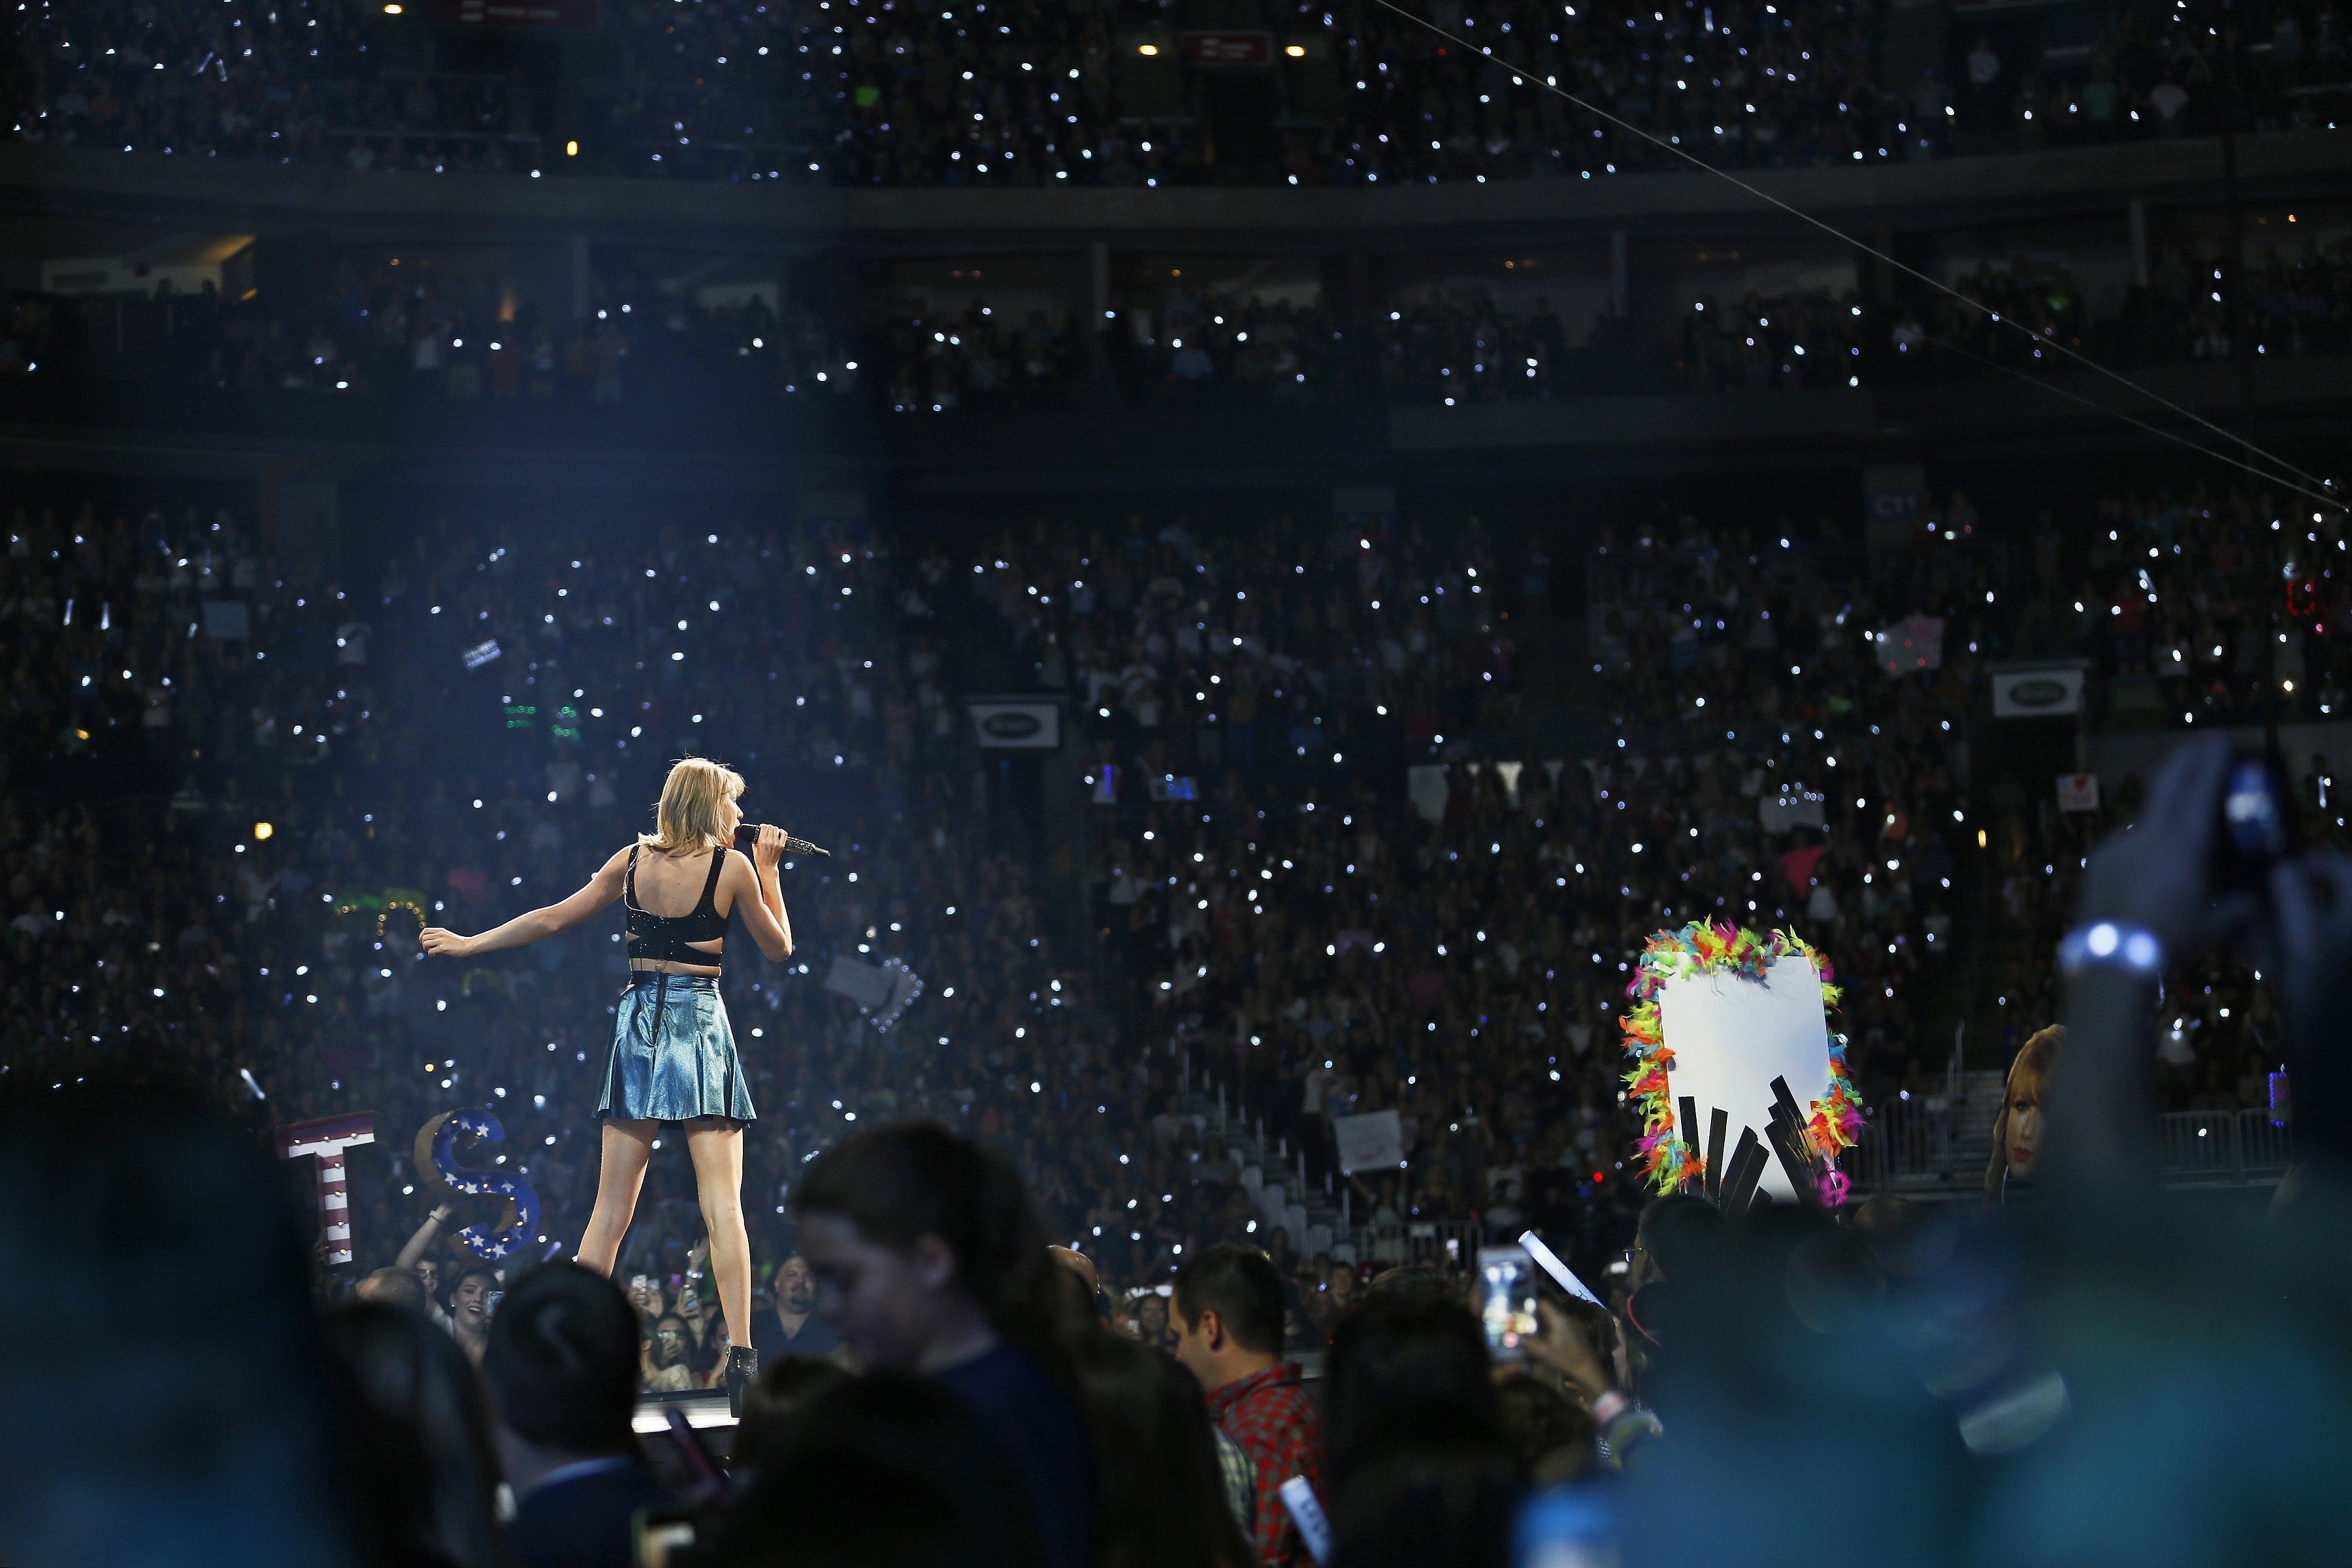 Taylor Swift performs at Nationwide Arena in Columbus on Sept. 17, 2015. (Adam Cairns / The Columbus Dispatch)